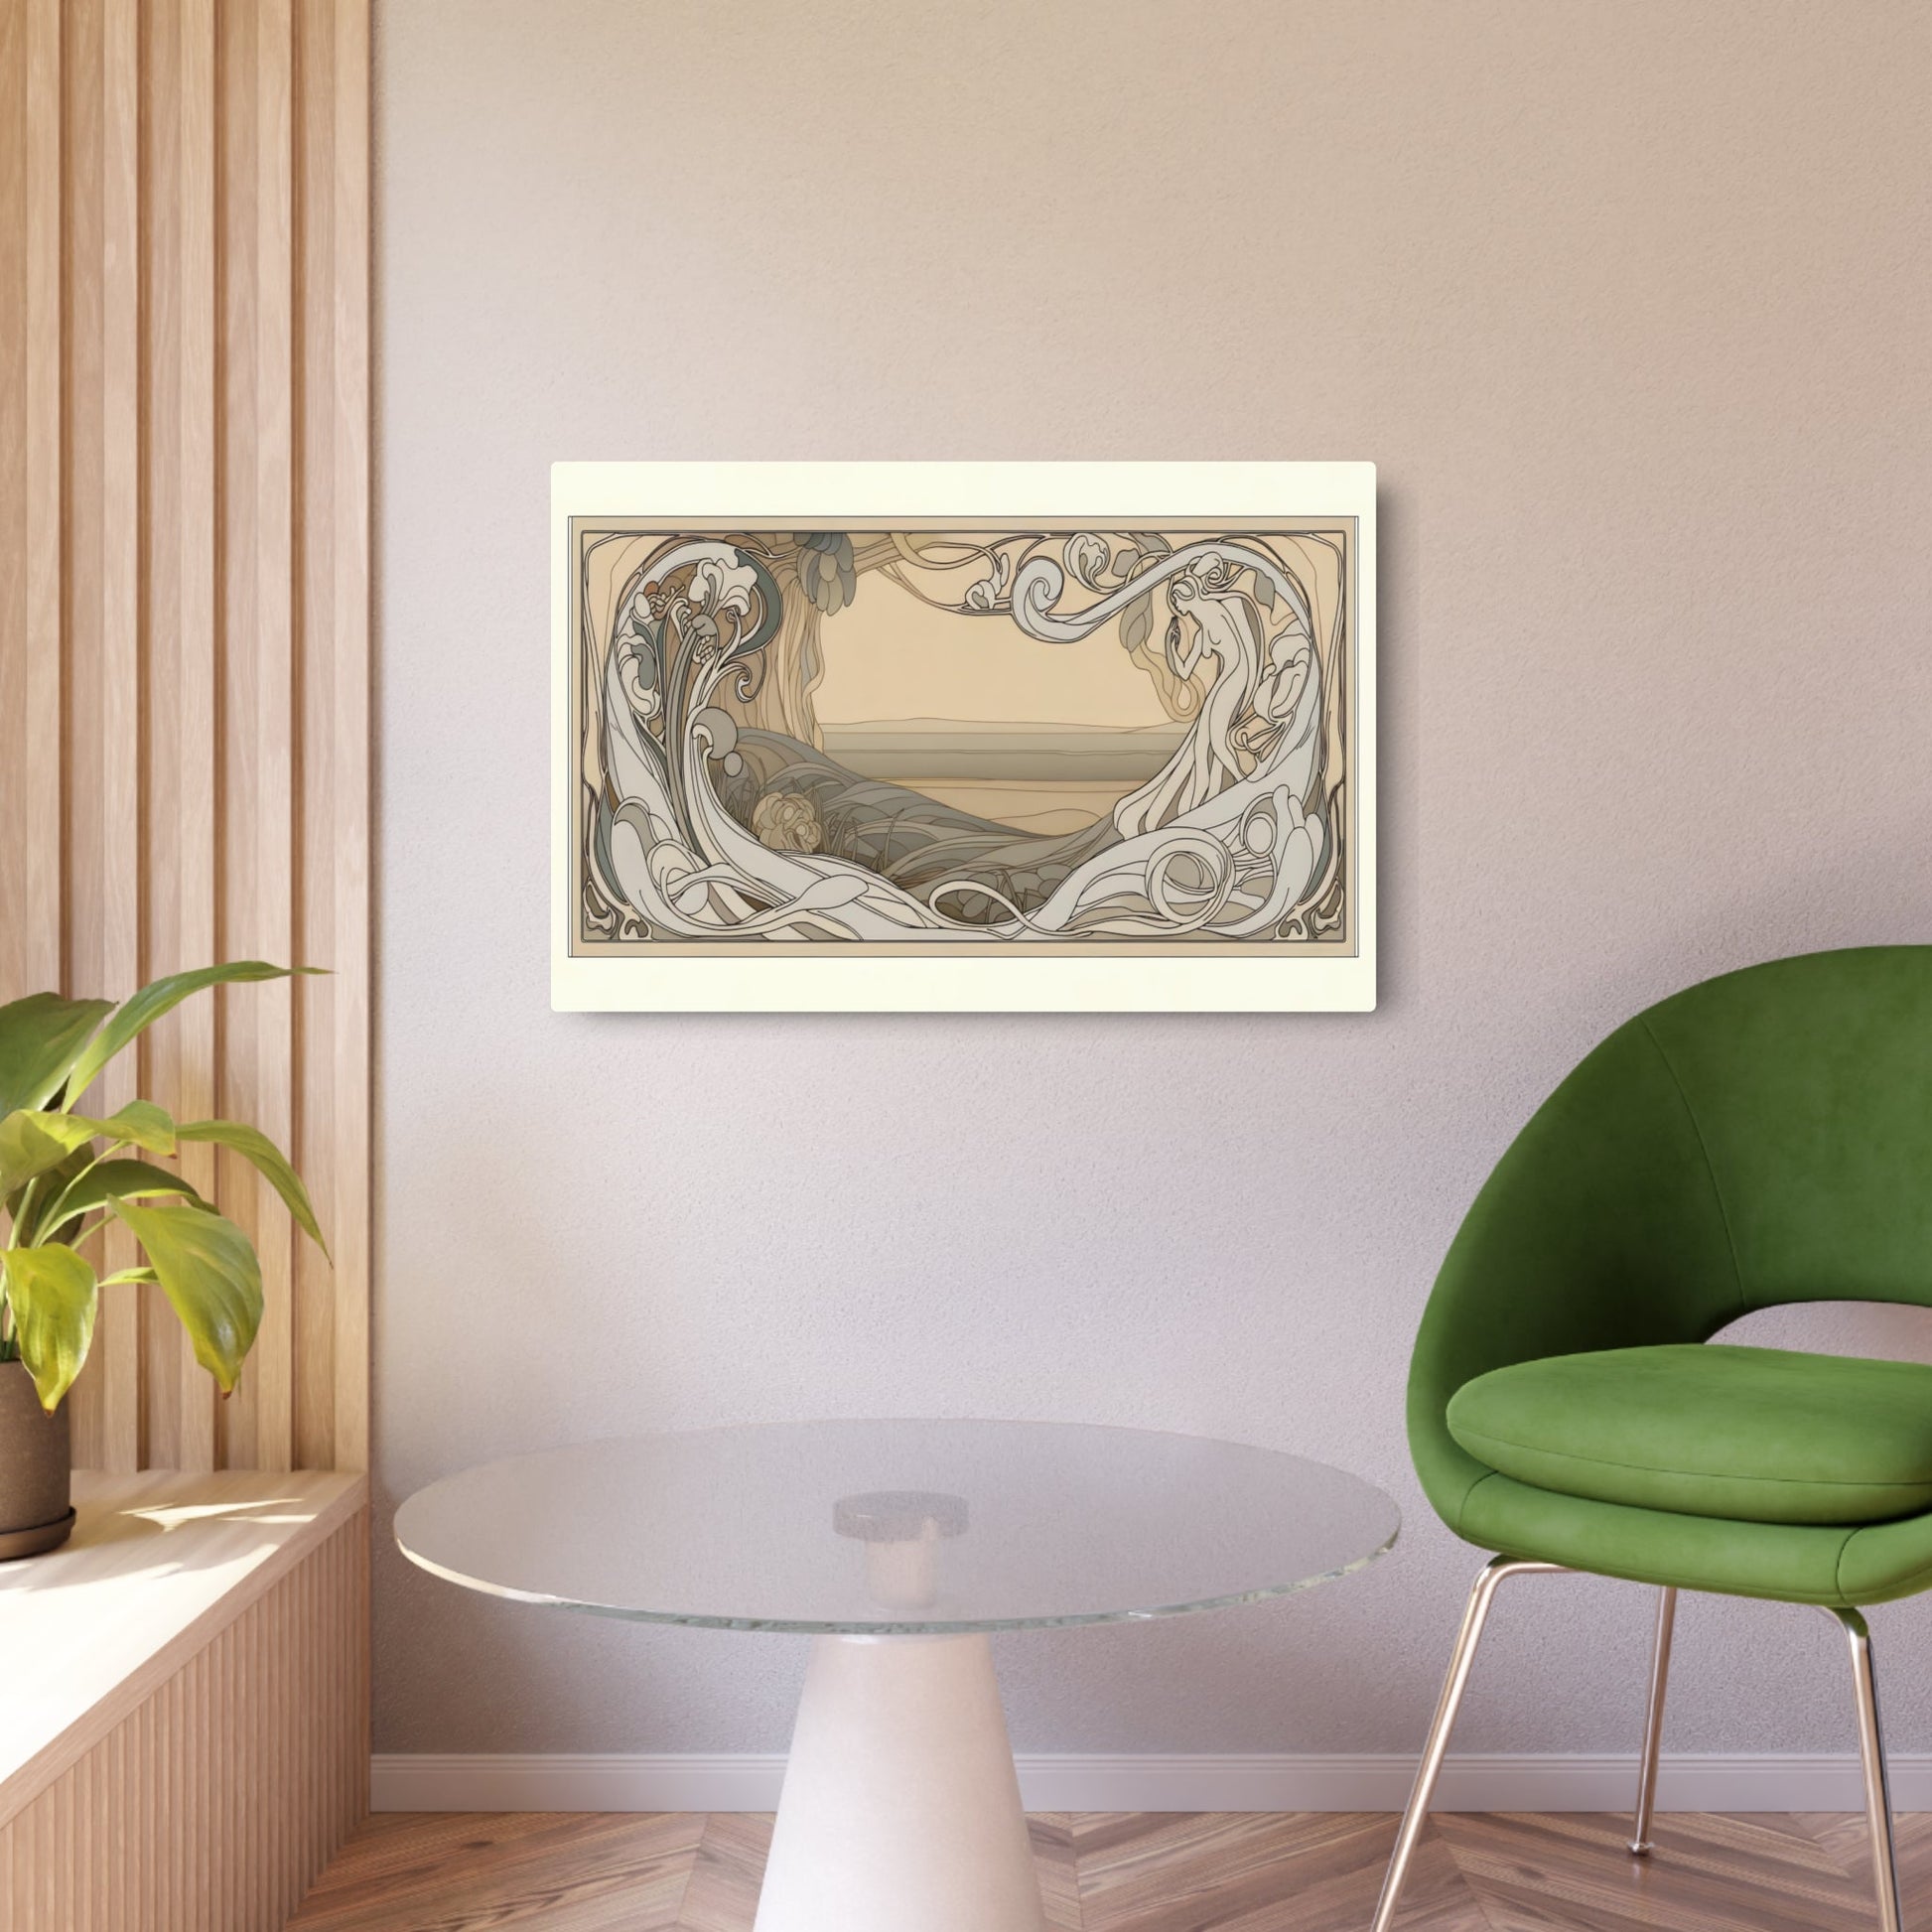 Metal Poster Art | "Art Nouveau Western Art Style: Expressive and Intricate Image with Elegant Organic Forms and Stylized Botanical Shapes" - Metal Poster Art 36″ x 24″ (Horizontal) 0.12''